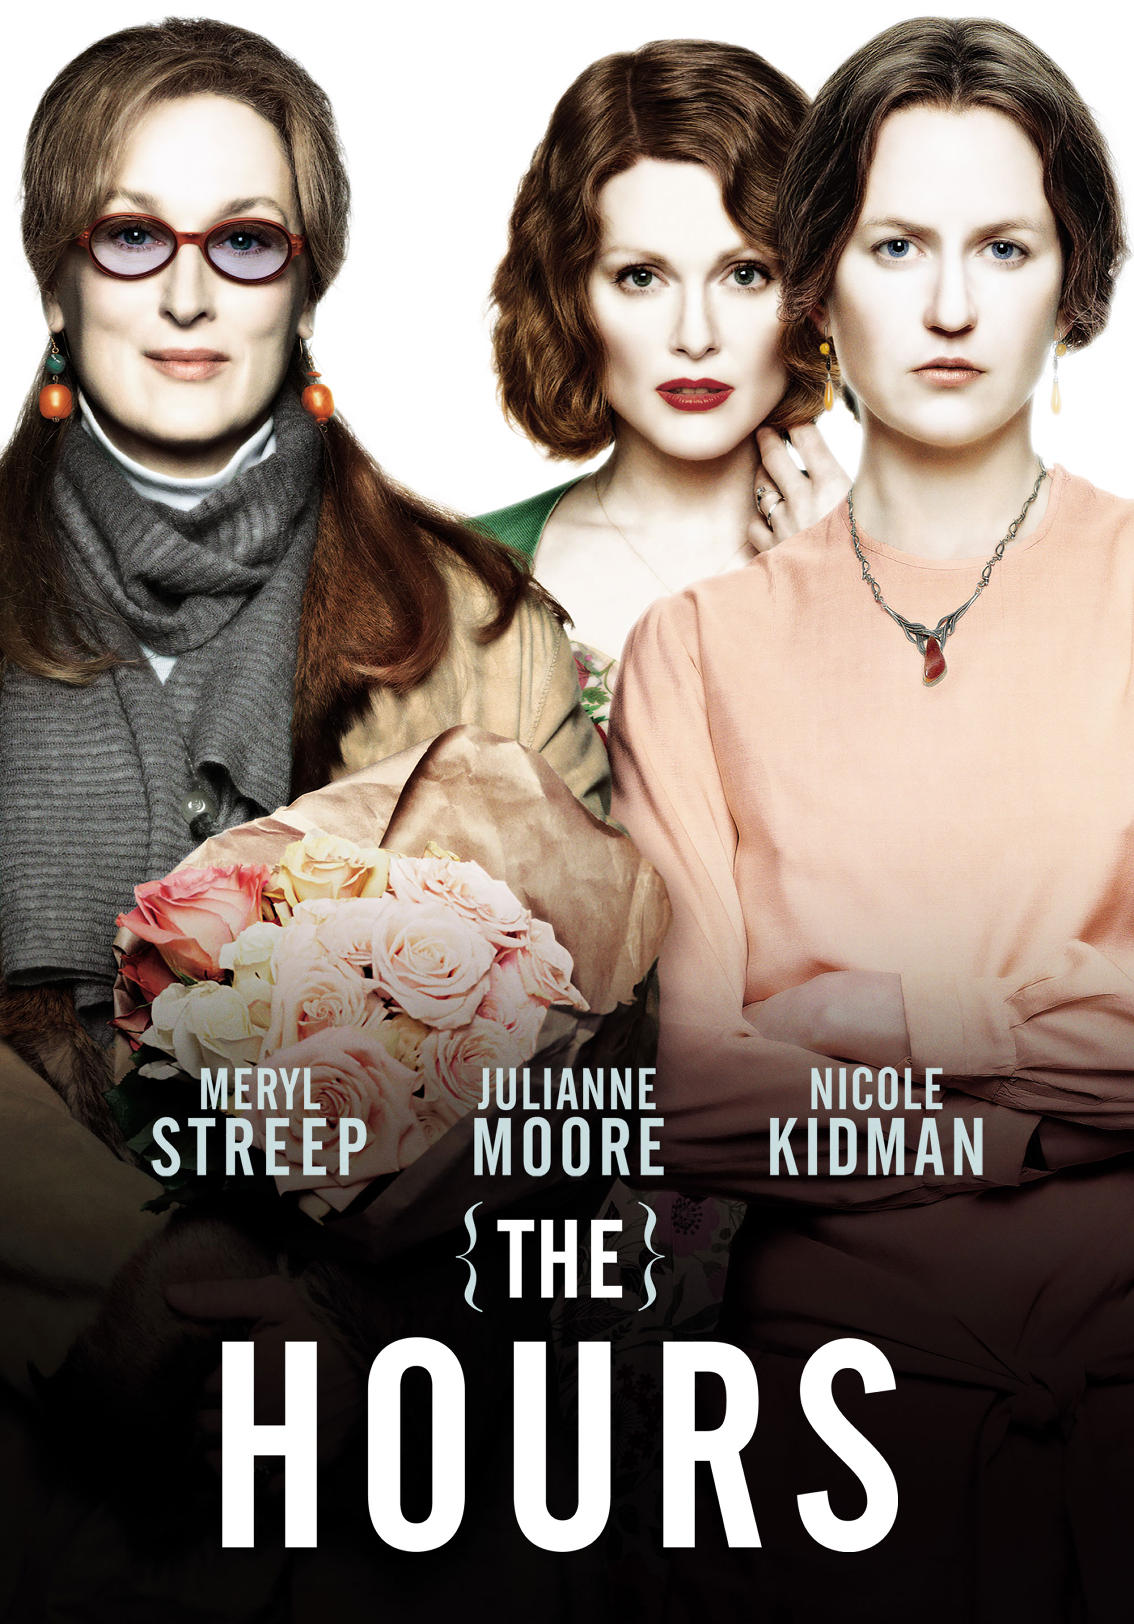 the hours movie review